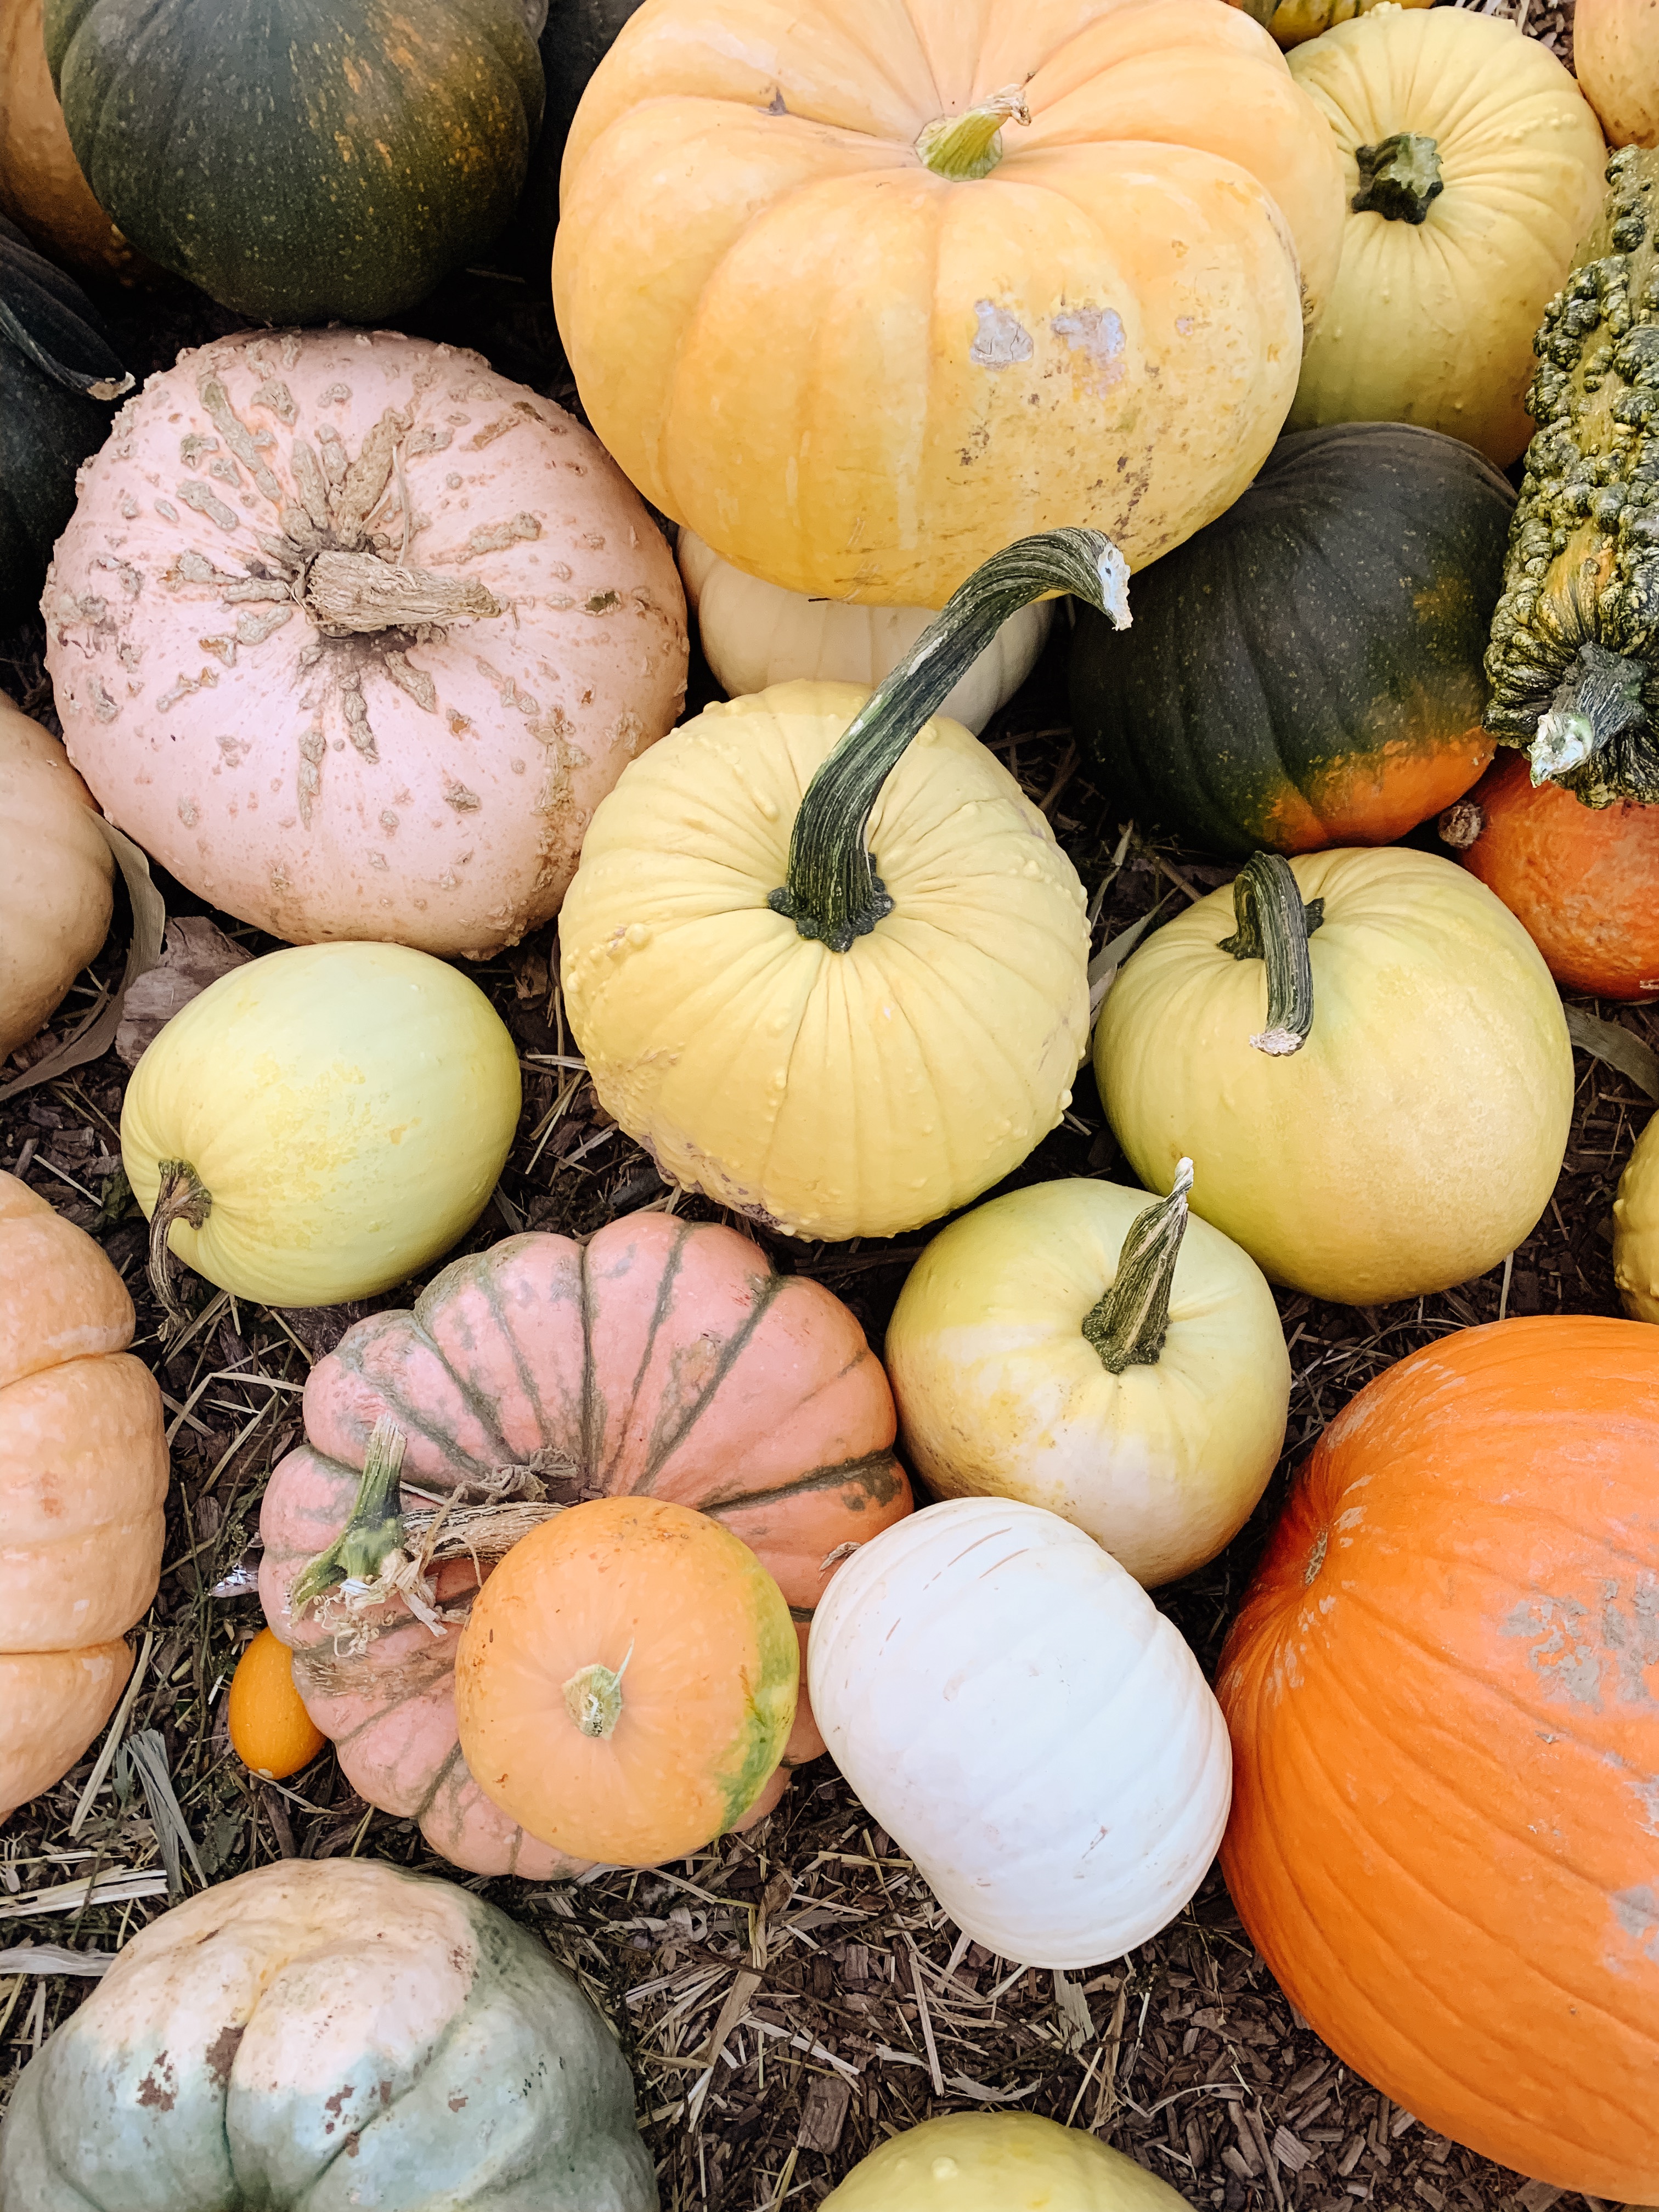 Visiting Peterson's Pumpkin Patch in Riverton